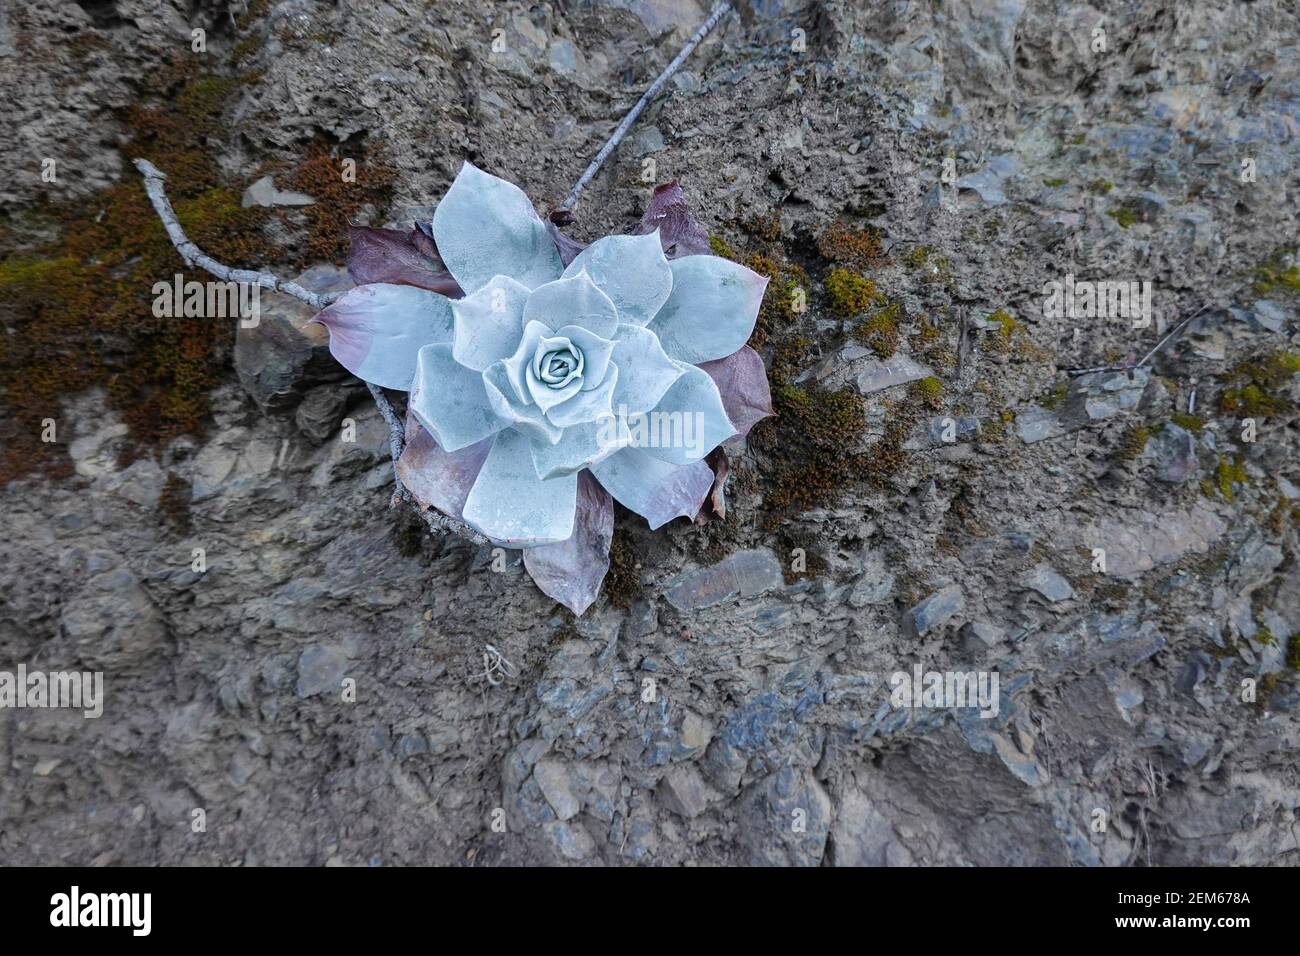 Dudleya brittonii growing on shale in the Cleveland national forest California Stock Photo